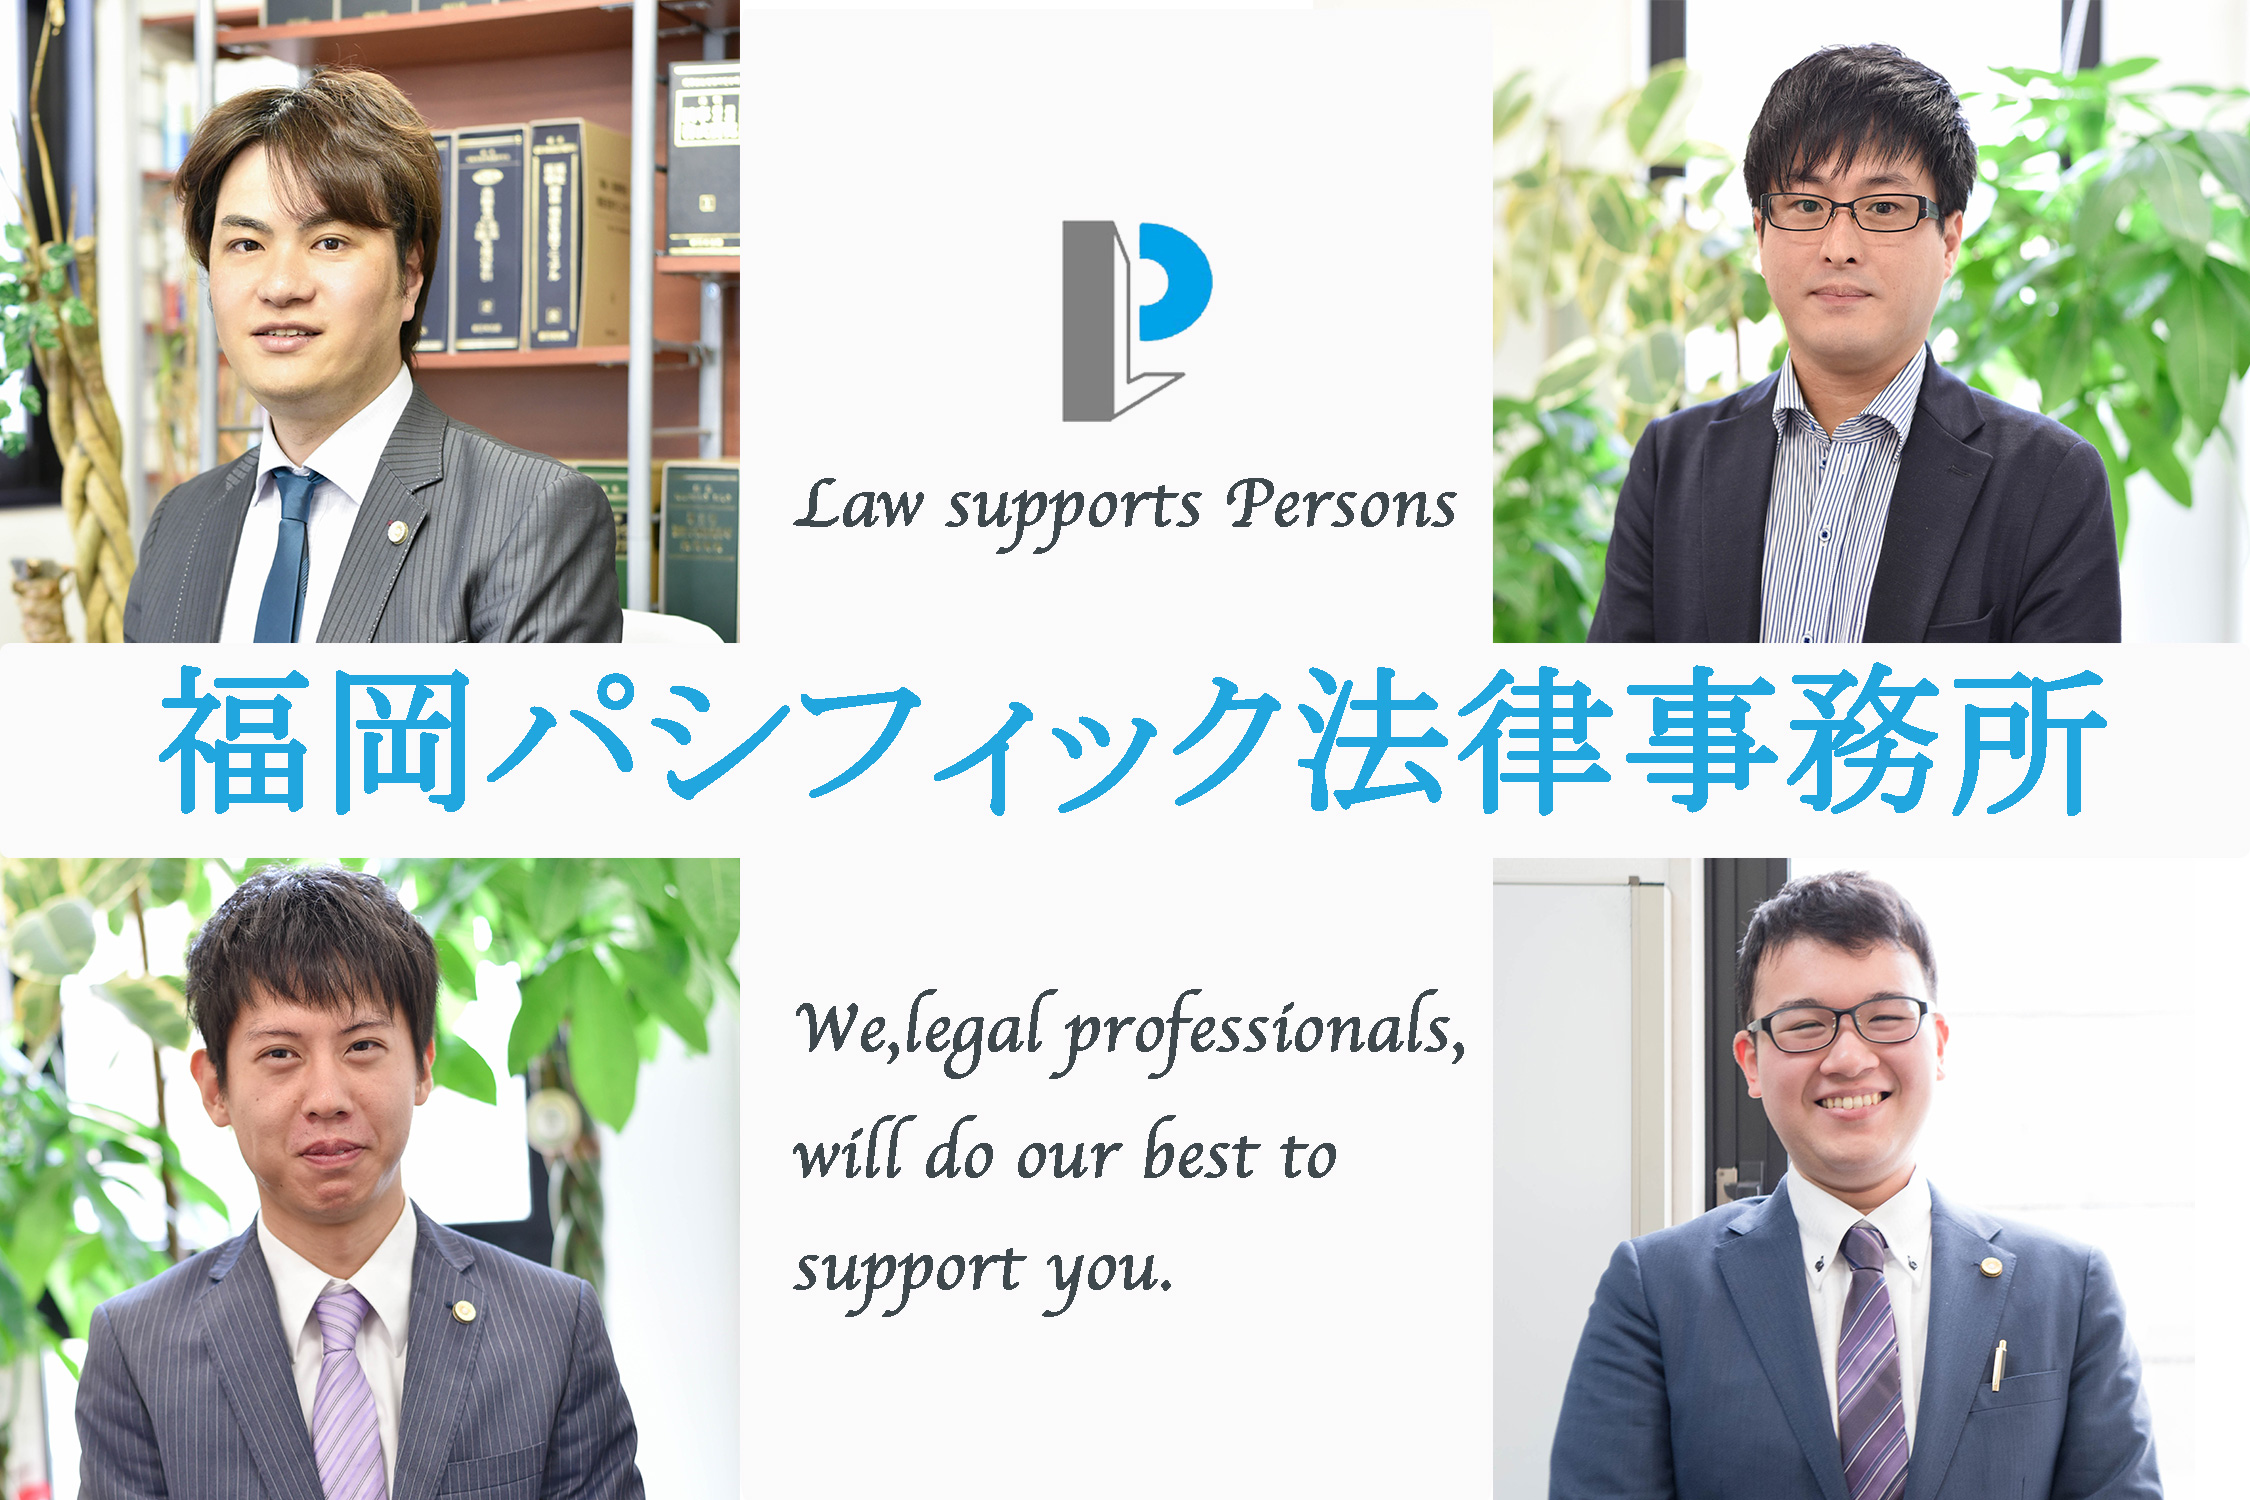 Law supports persons